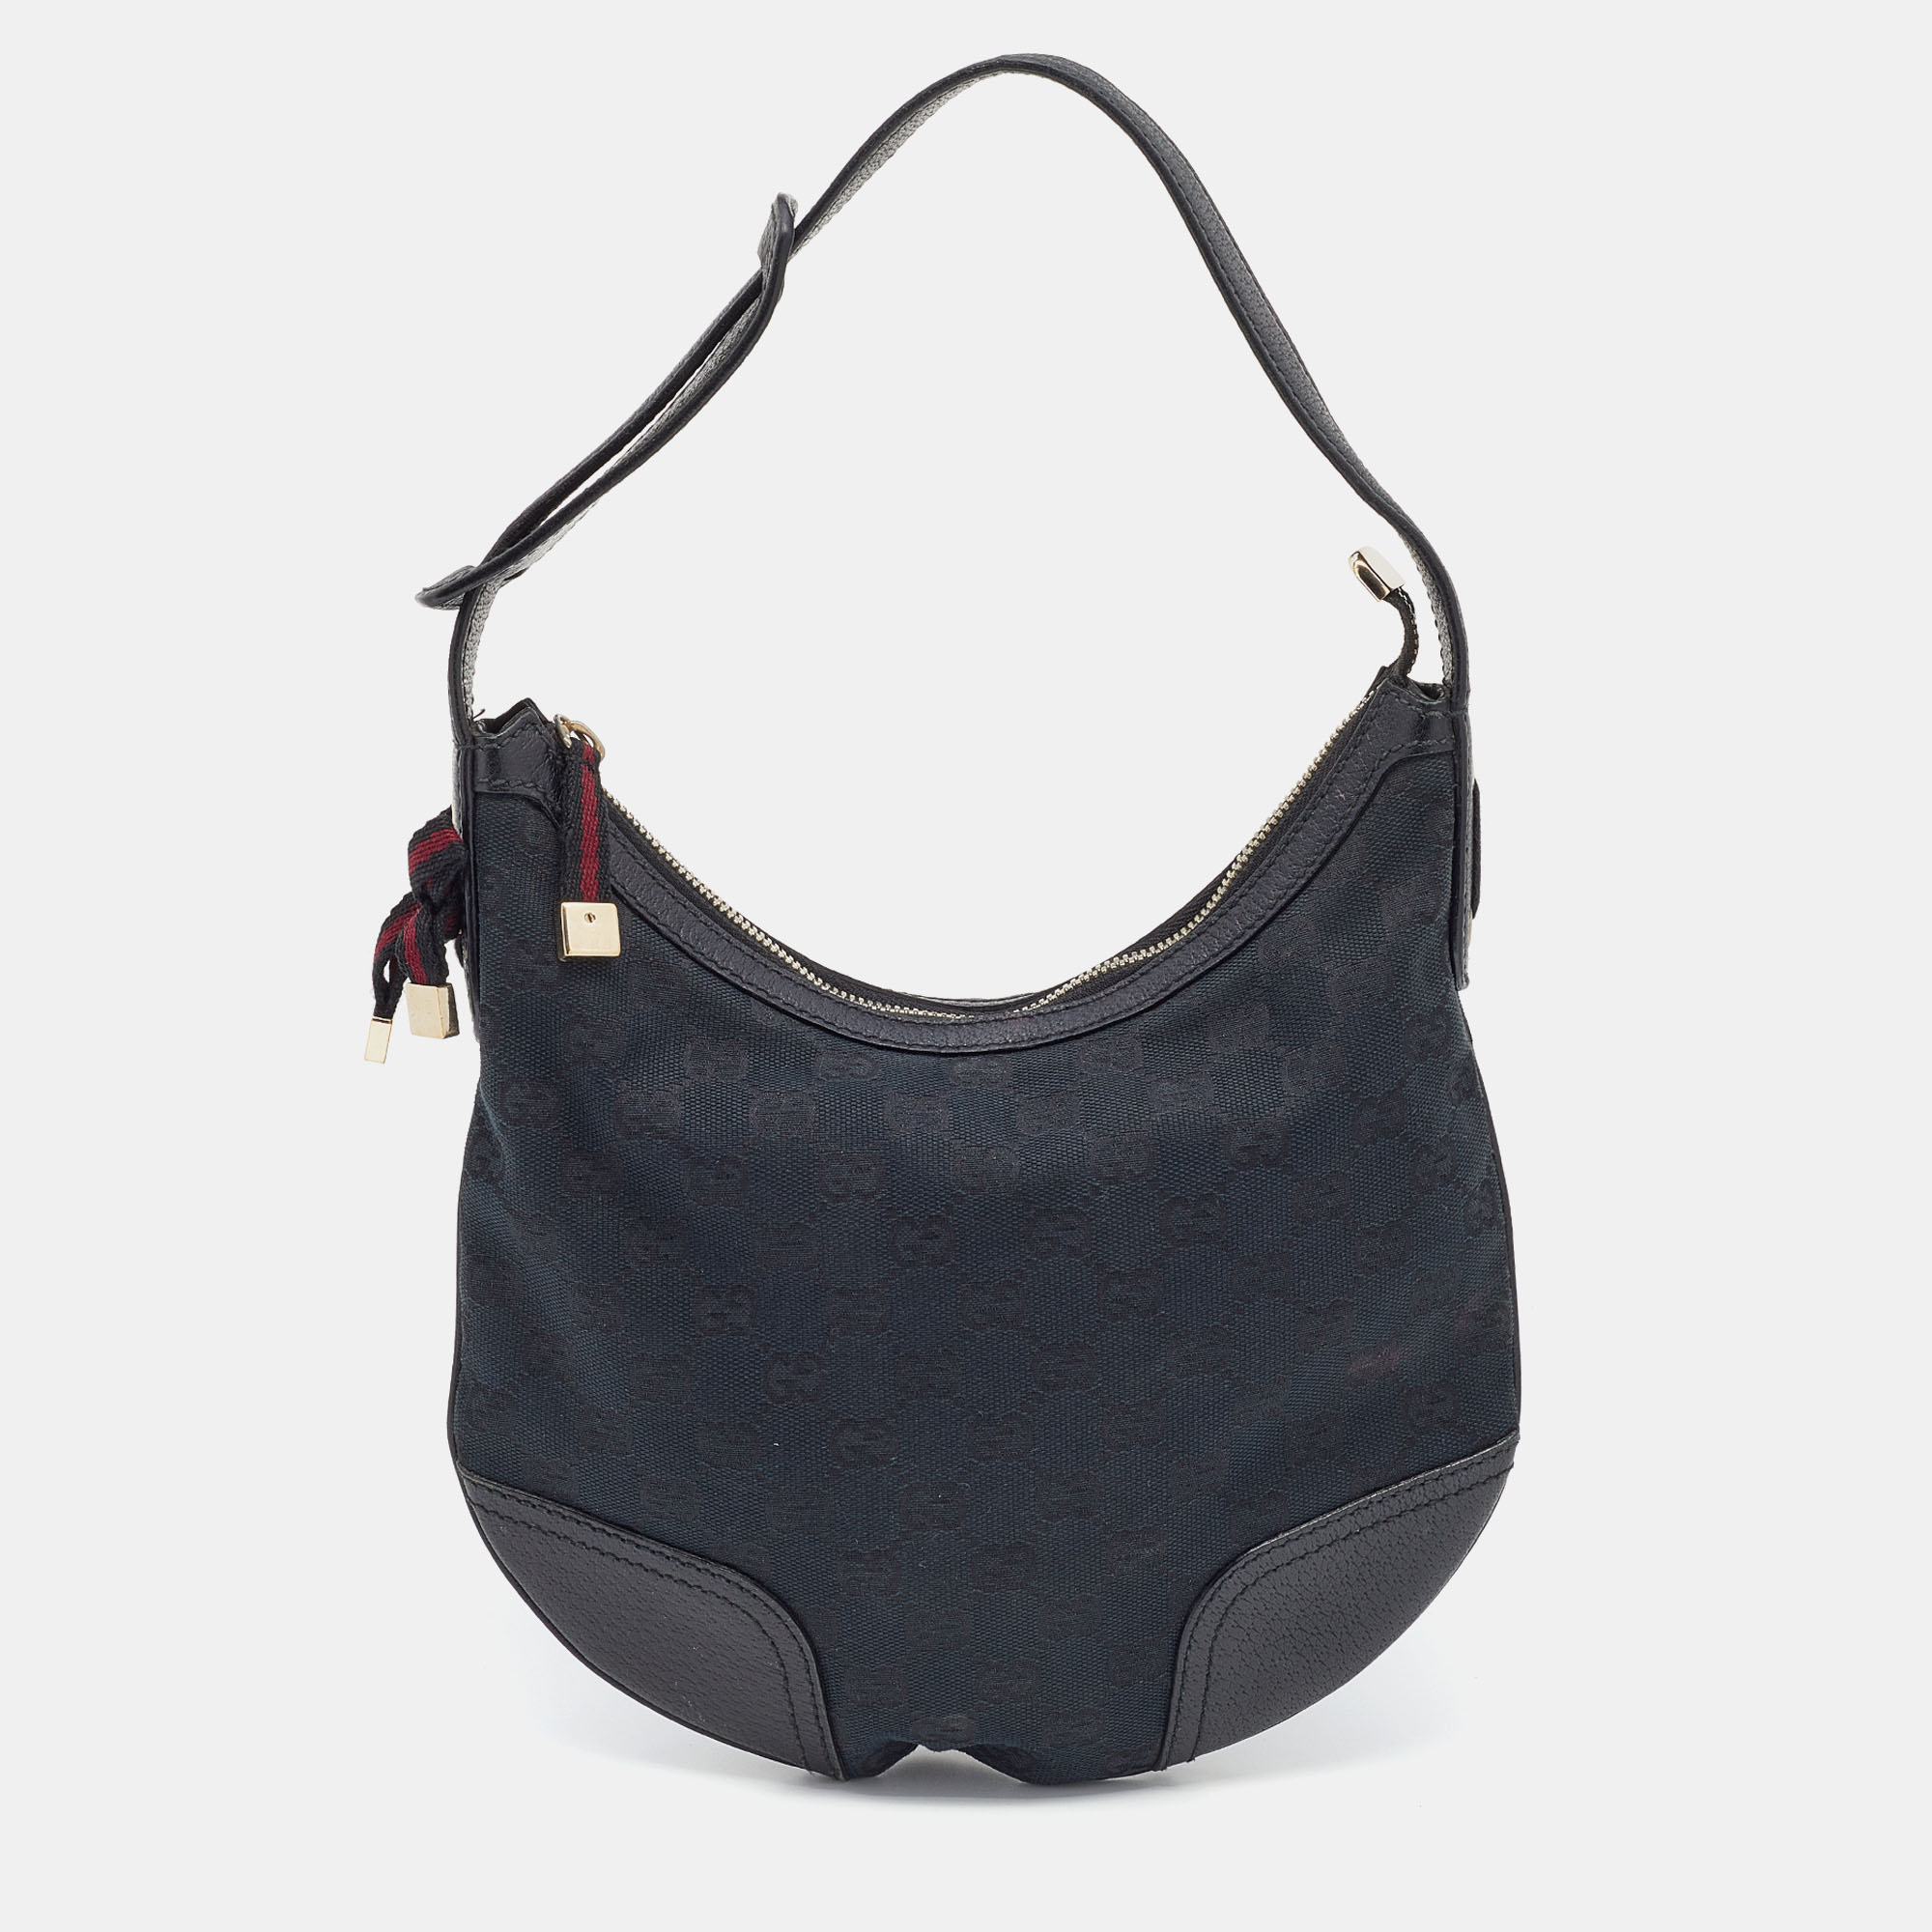 Crafted from canvas and leather this hobo from Gucci is designed with minimal style details but with high attention to craftsmanship so that it may assist you with durability. The spacious interior of the bag is lined with fabric and secured by a zipper and the hobo is held by a single handle.